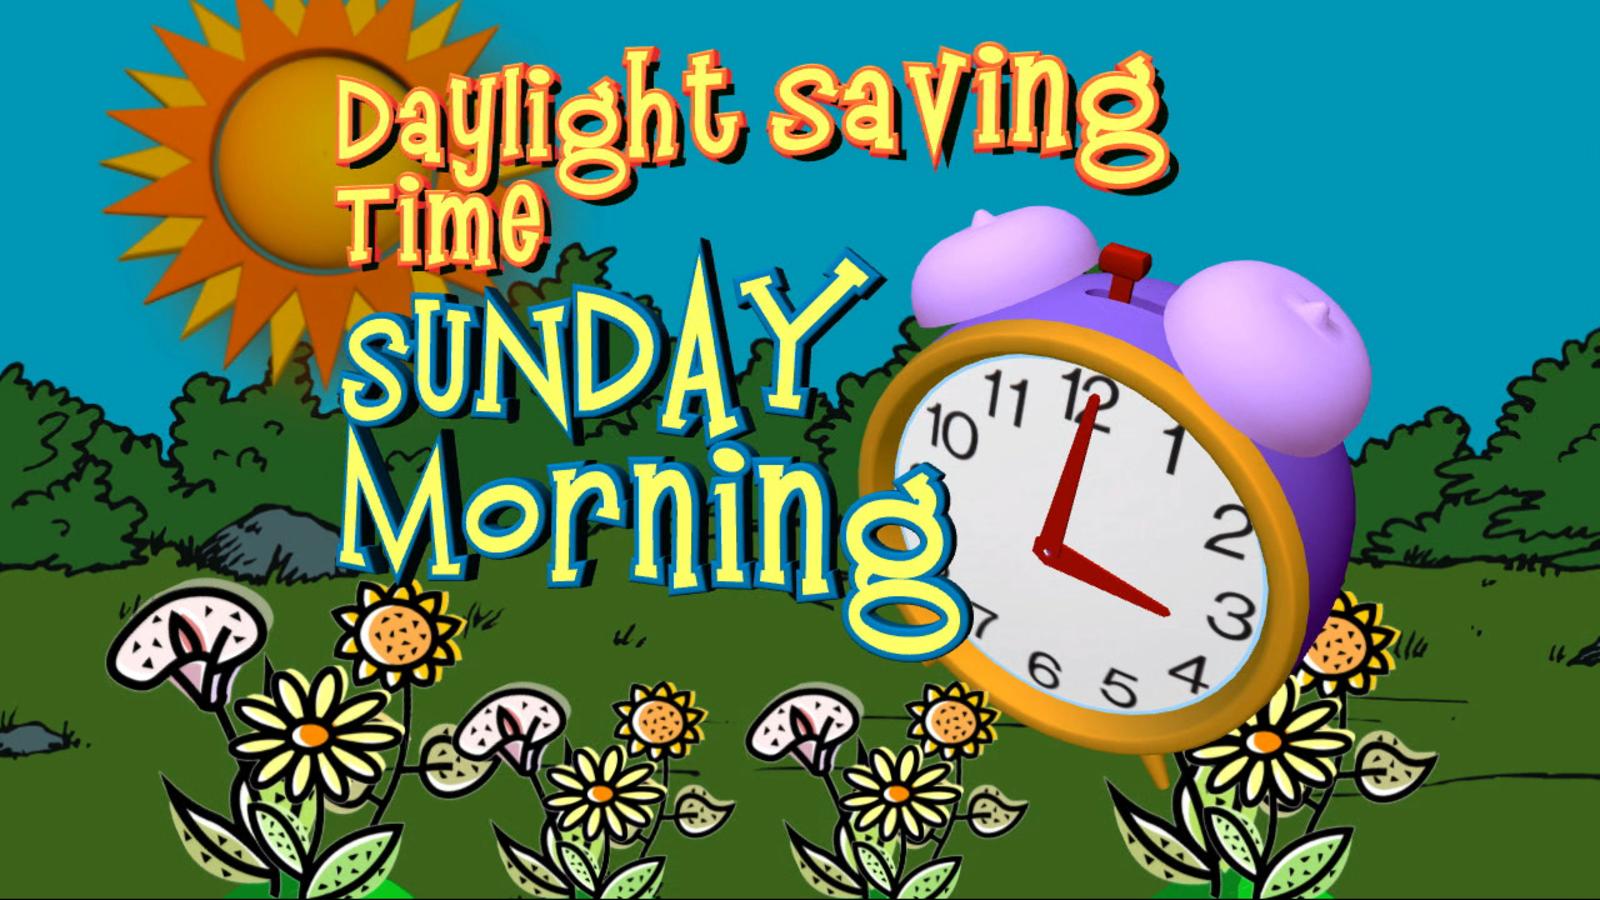 Daylight Saving Time Videos At Abc News Video Archive